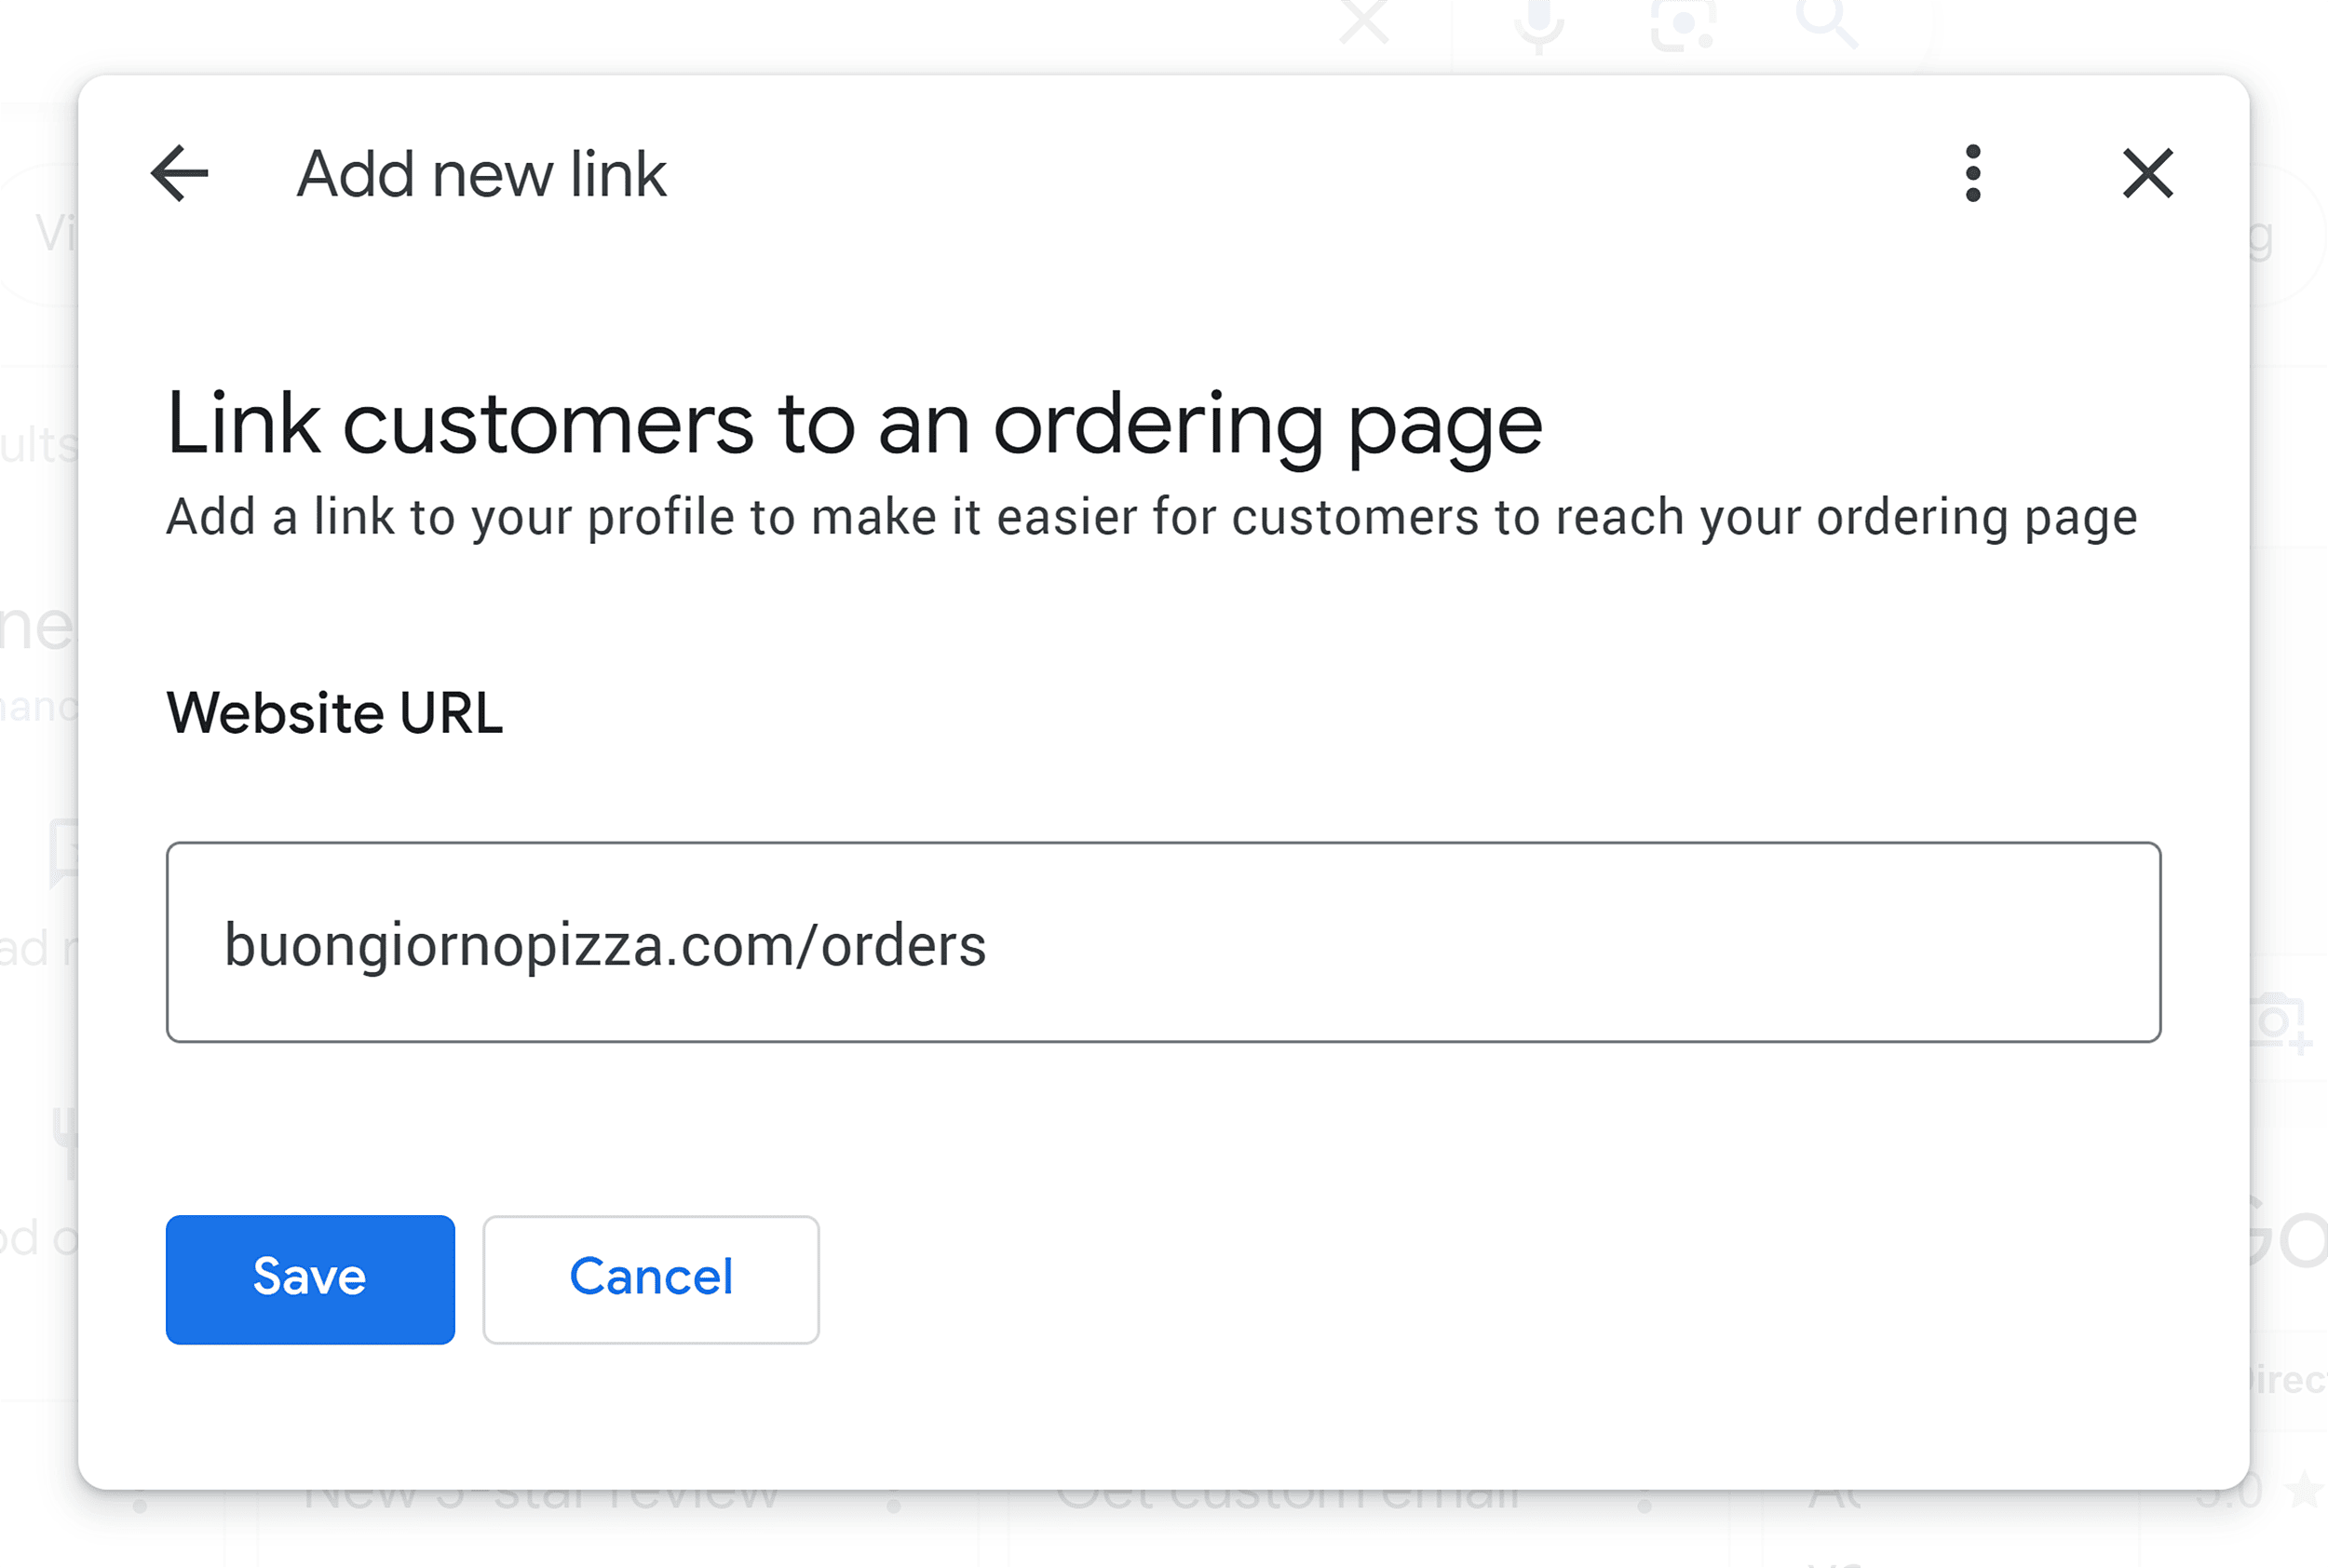 Add link to ordering page